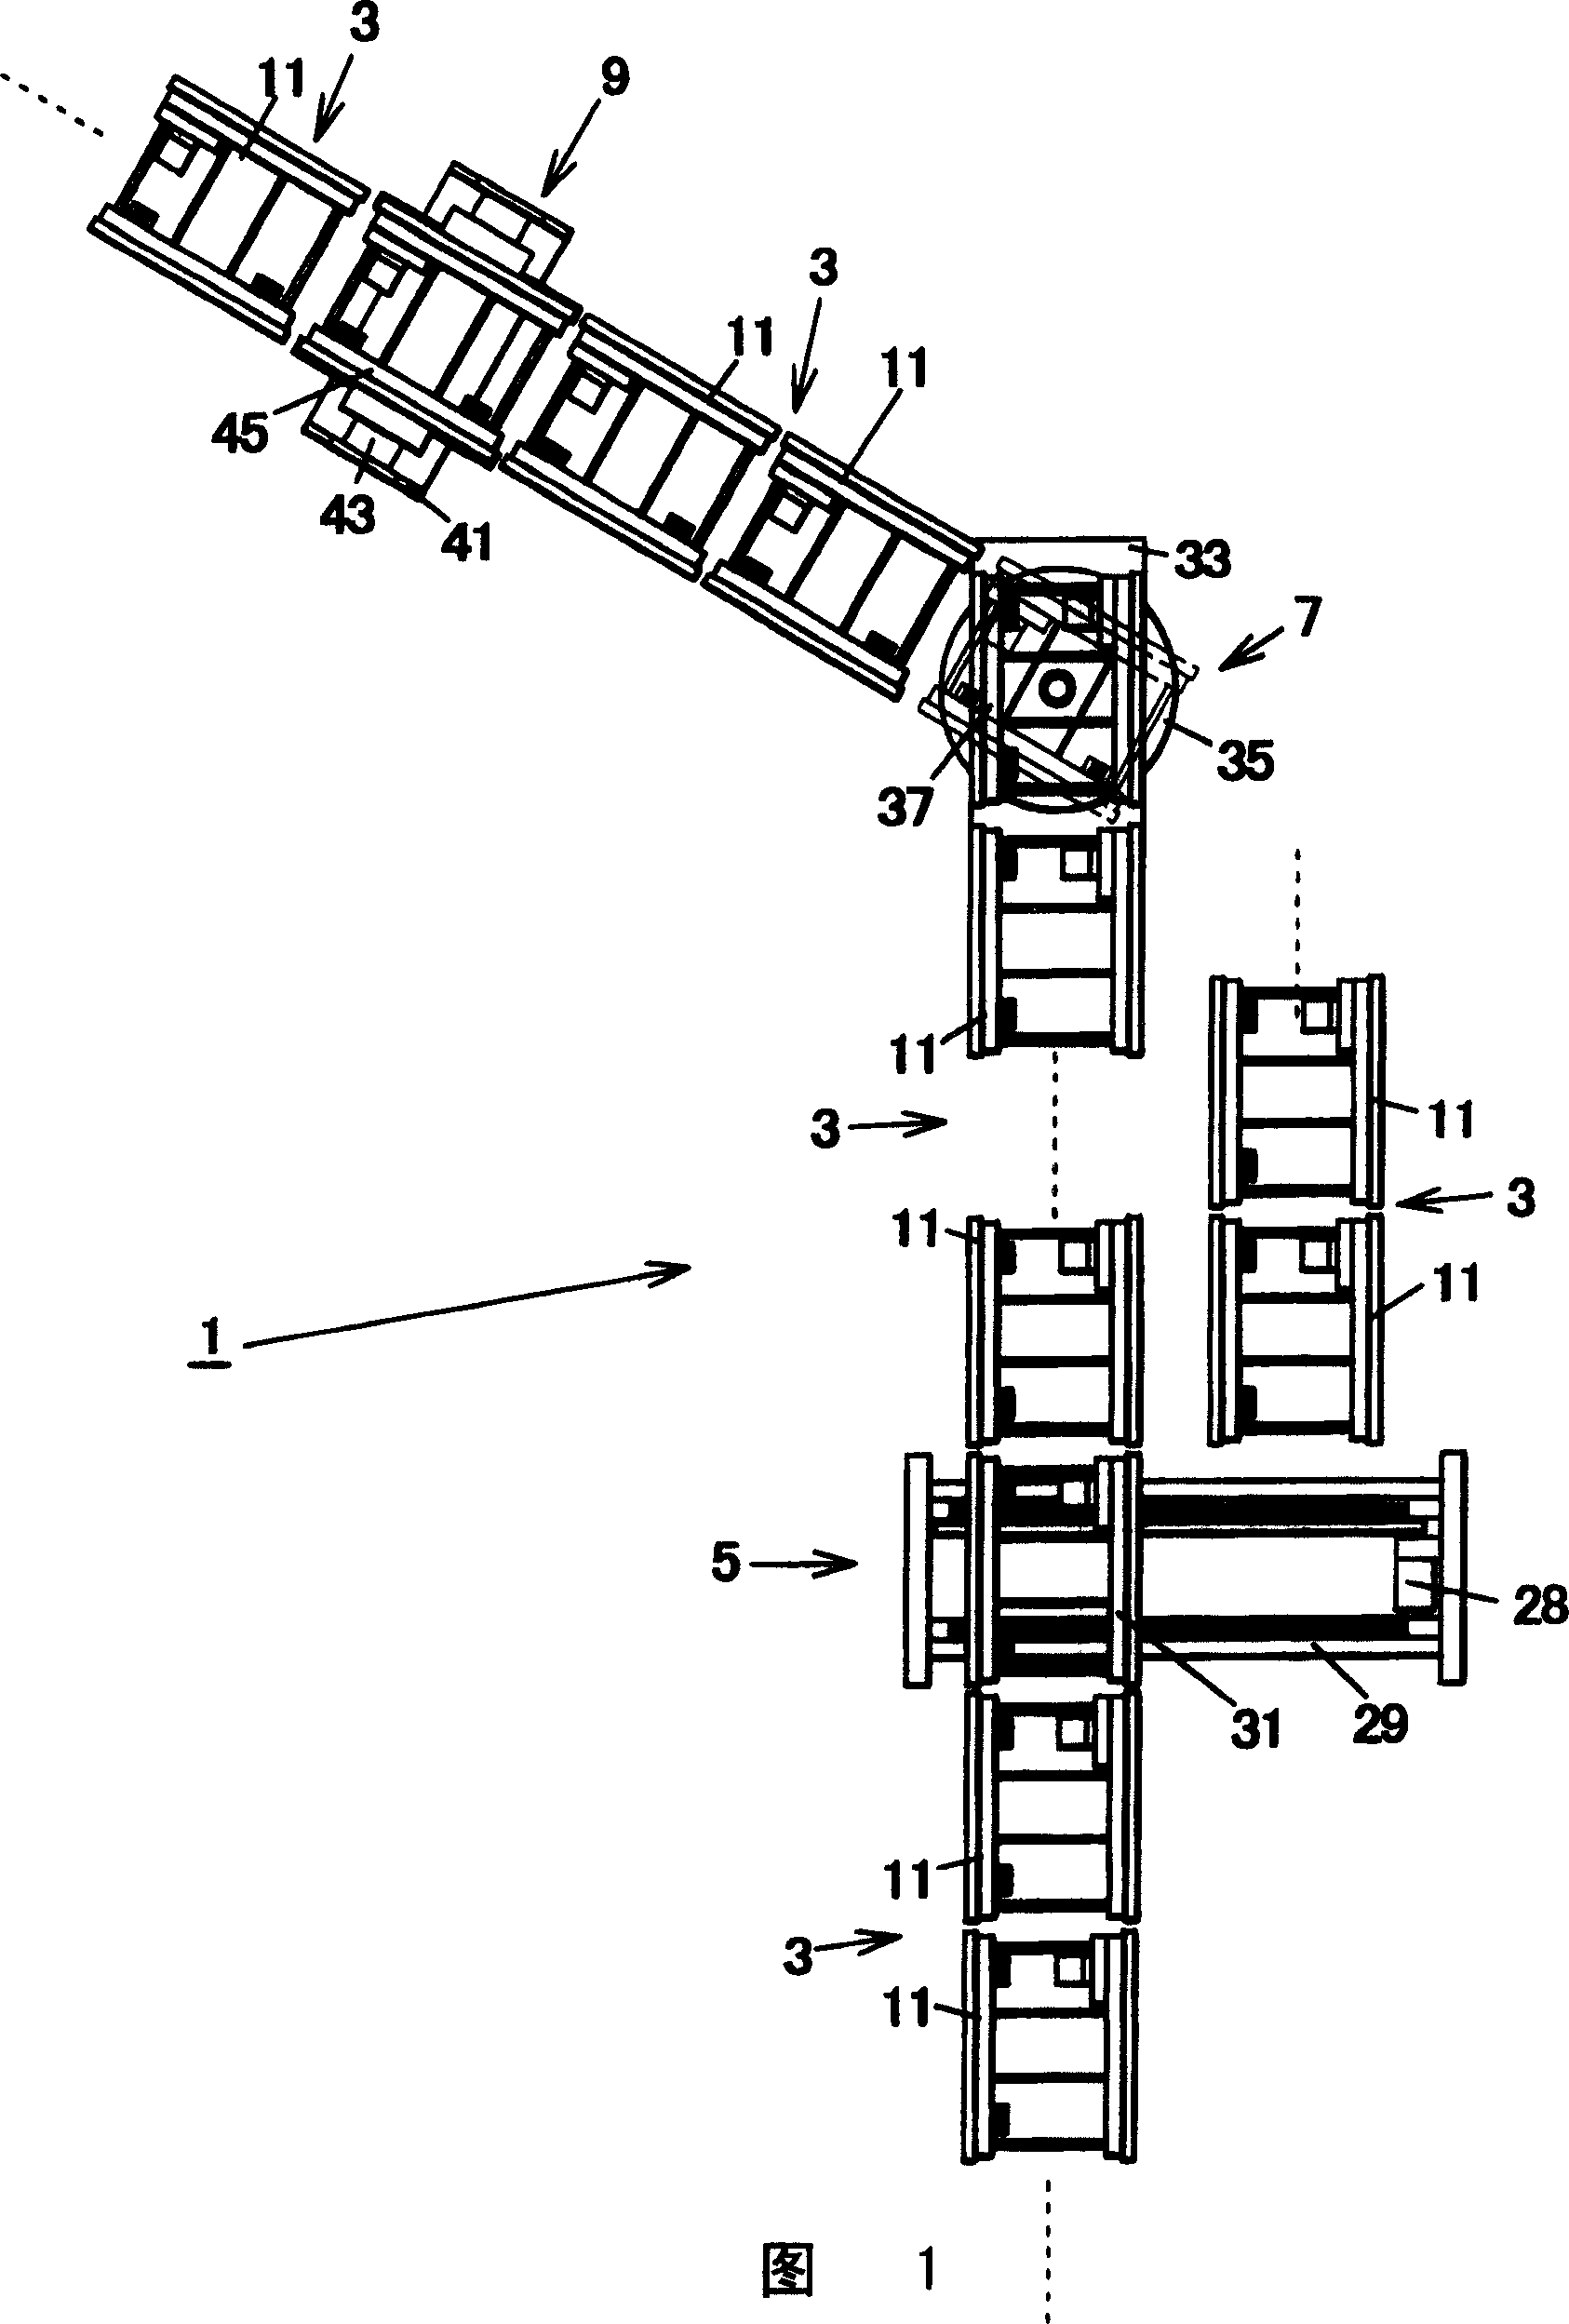 Free flow conveyance system